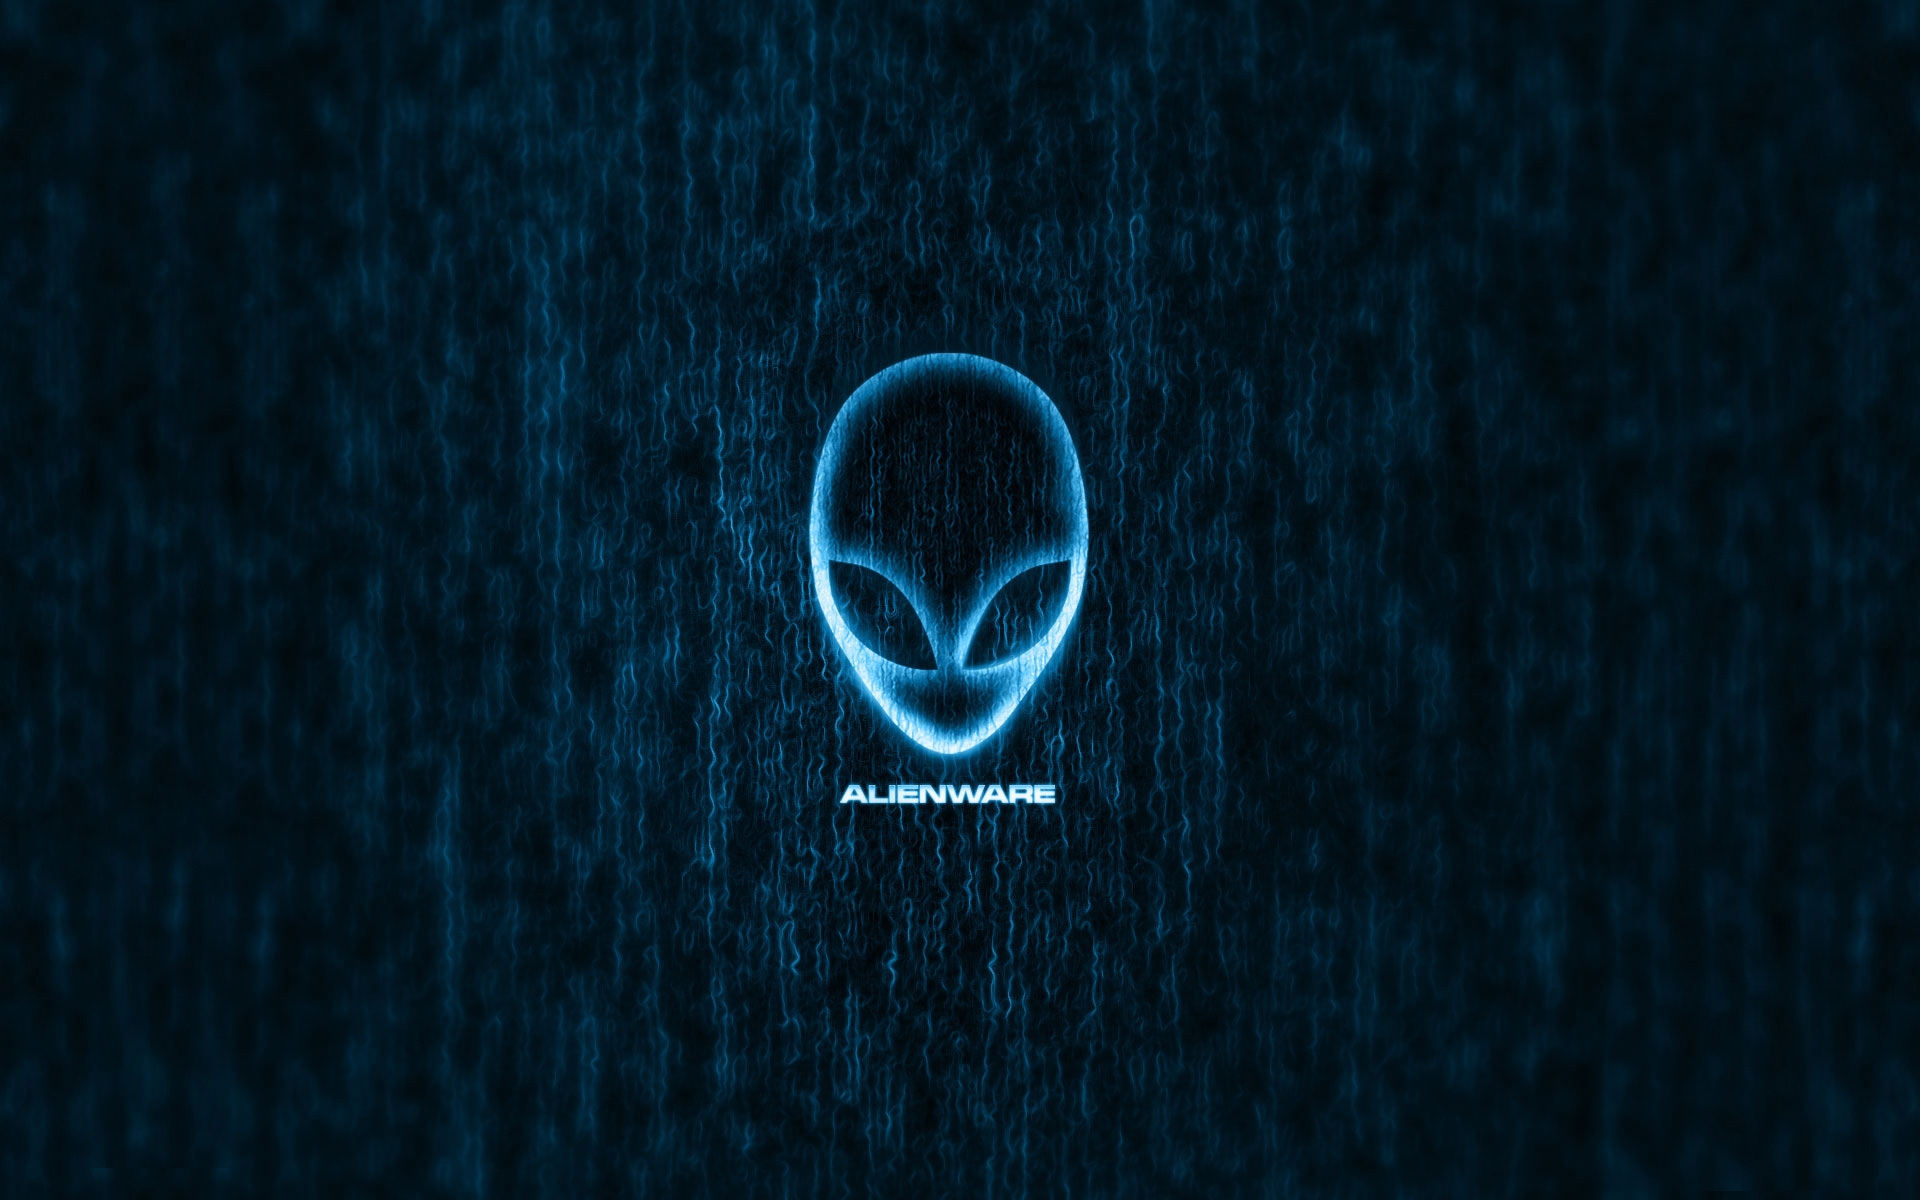 alienware-logo-hd-high-definition-widescreen-wallpapers-free-download-mobile-pc-computer-desktop-tablet-android-high-resolution-backgrounds.jpg